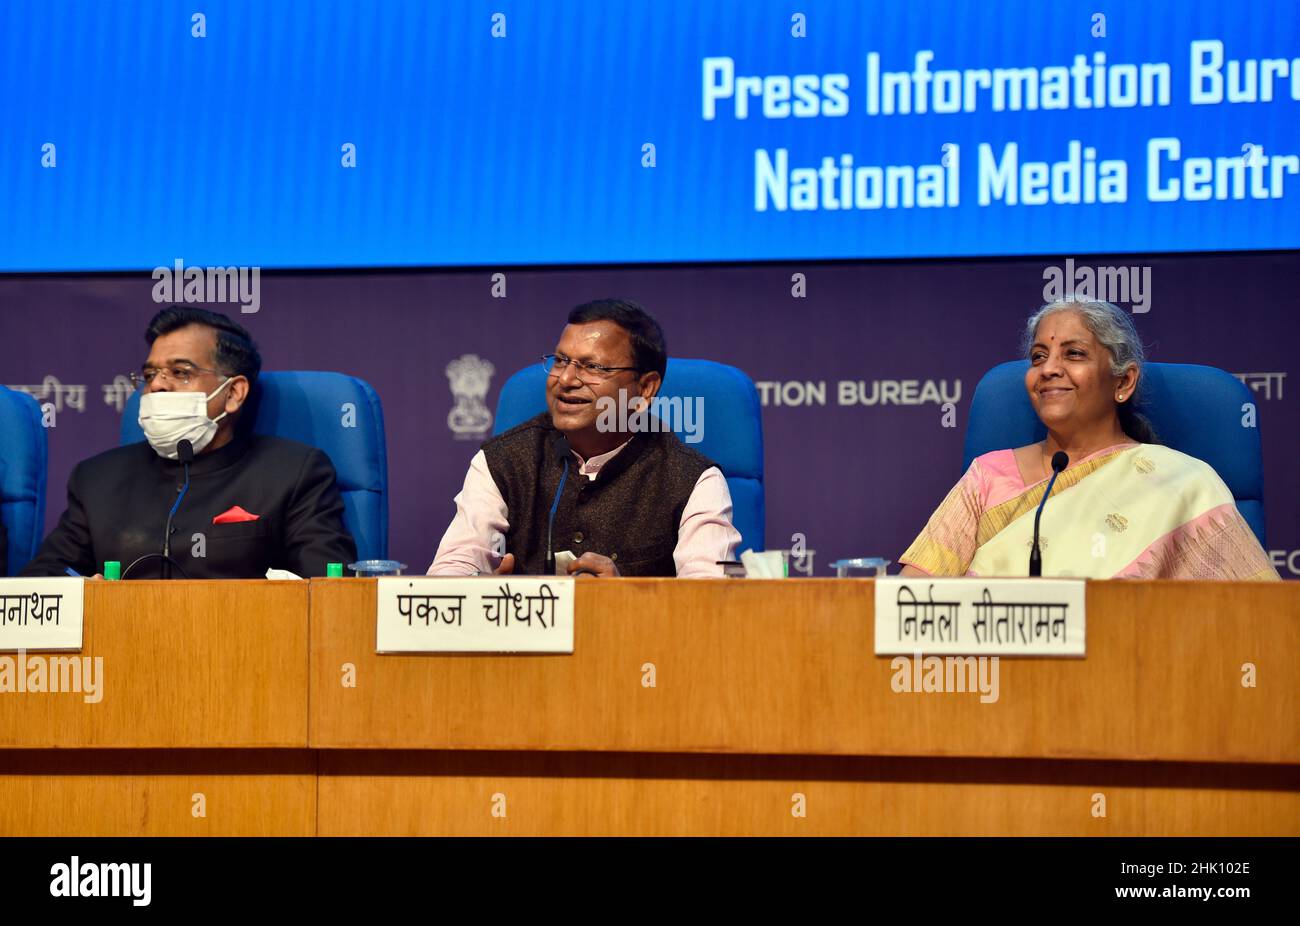 NEW DELHI, INDIA - FEBRUARY 1: Minister of Finance and Corporate Affairs of India Nirmala Sitharaman with MoS Pankaj Choudhary and Bhagwat Karad along with senior officials addressing media persons post budget 2022-23, at National Media Centre, on February 1, 2022 in New Delhi, India. Nirmala Sitharaman, who presented Union Budget 2022 in Parliament on Tuesday, said that it will lay the foundation for economic growth through public investment as Asia's third-largest economy emerges from a pandemic-induced slump. (Photo by Sanjeev Verma/Hindustan Times/Sipa USA ) Stock Photo